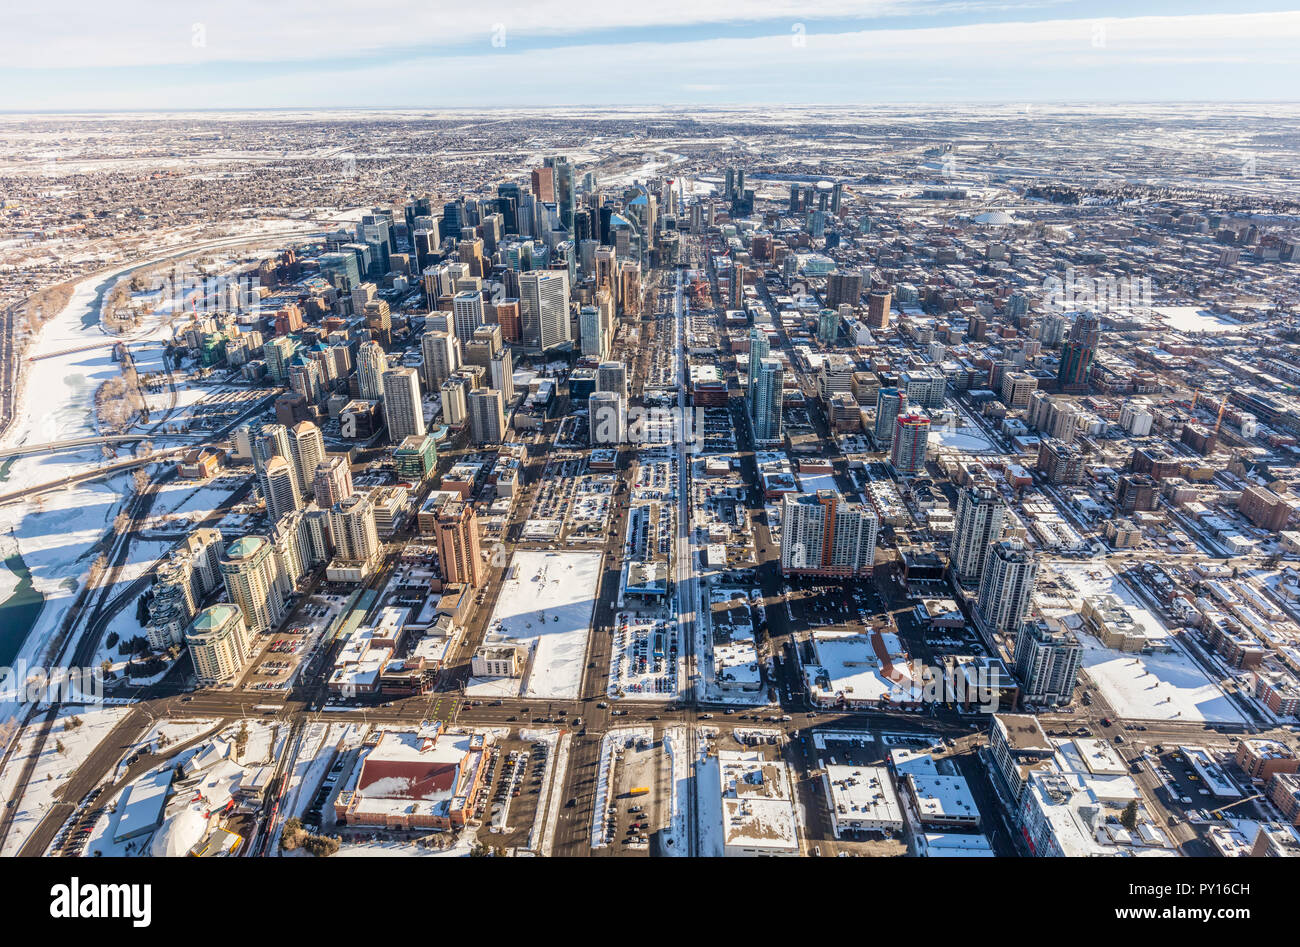 Aerial view of Calgary city centre from helicopter in winter. Stock Photo